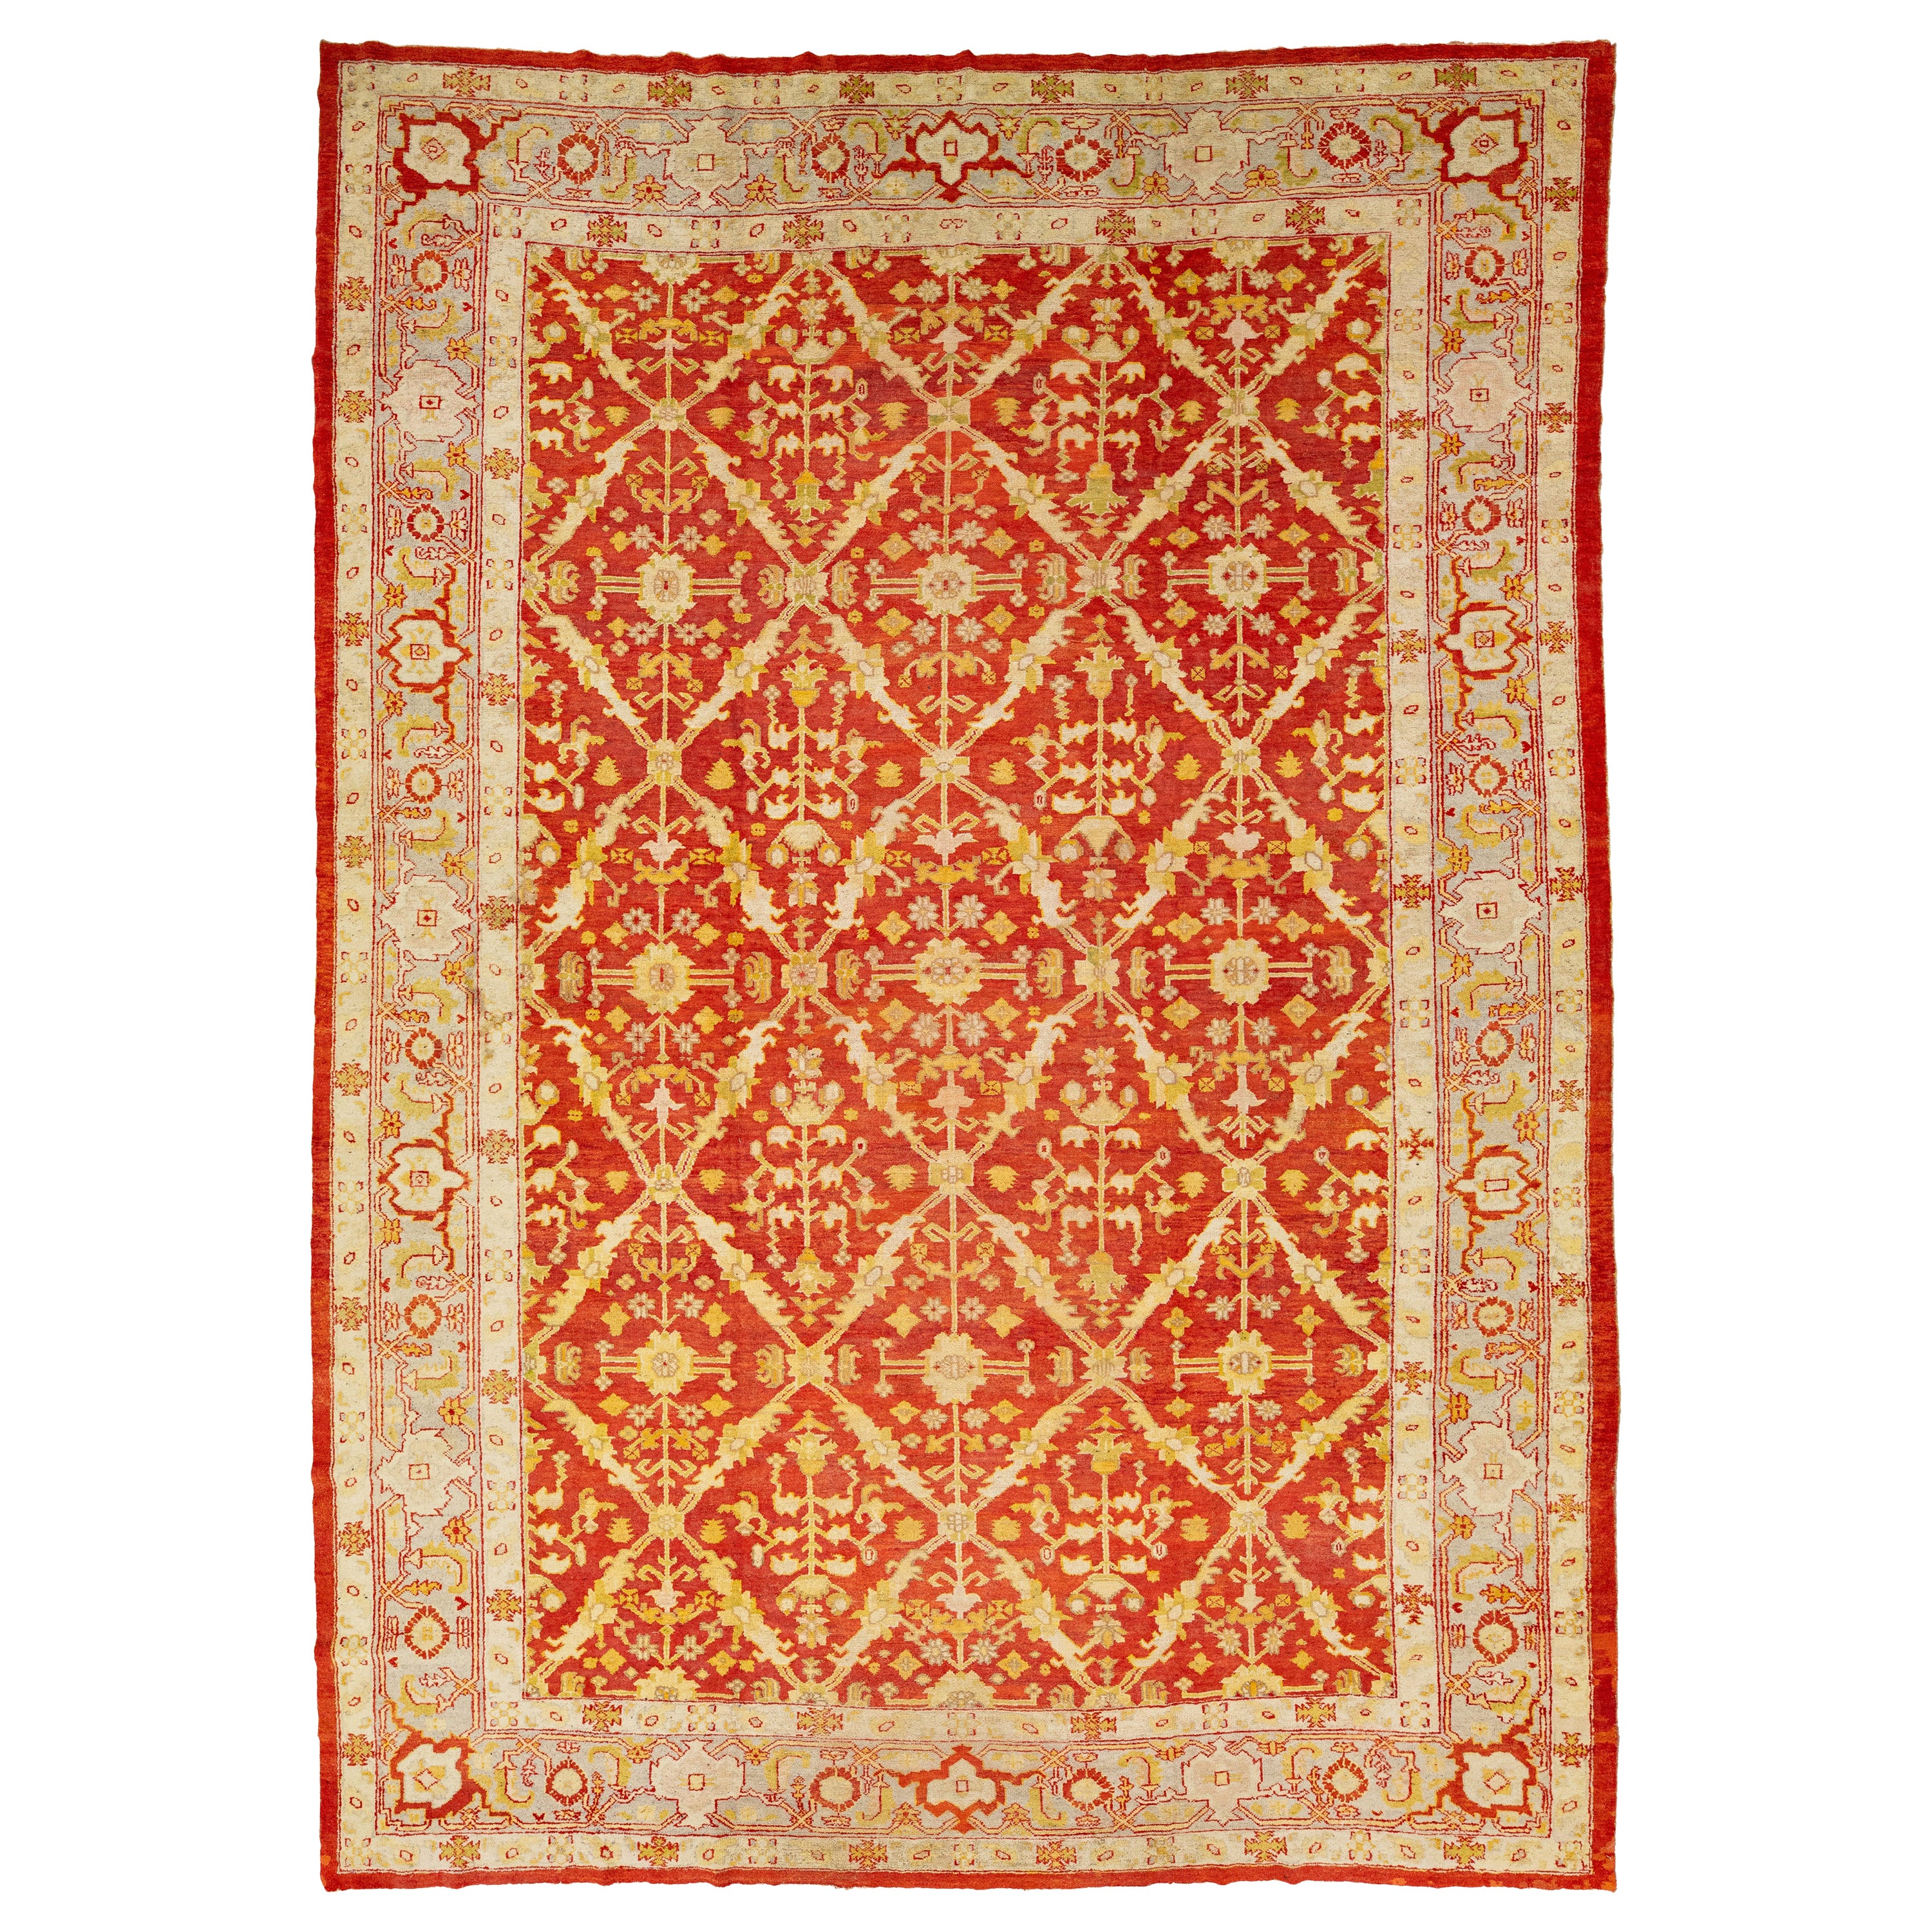 Handmade Red Turkish Oushak Wool Rug Featuring a Floral Pattern From The 1880's